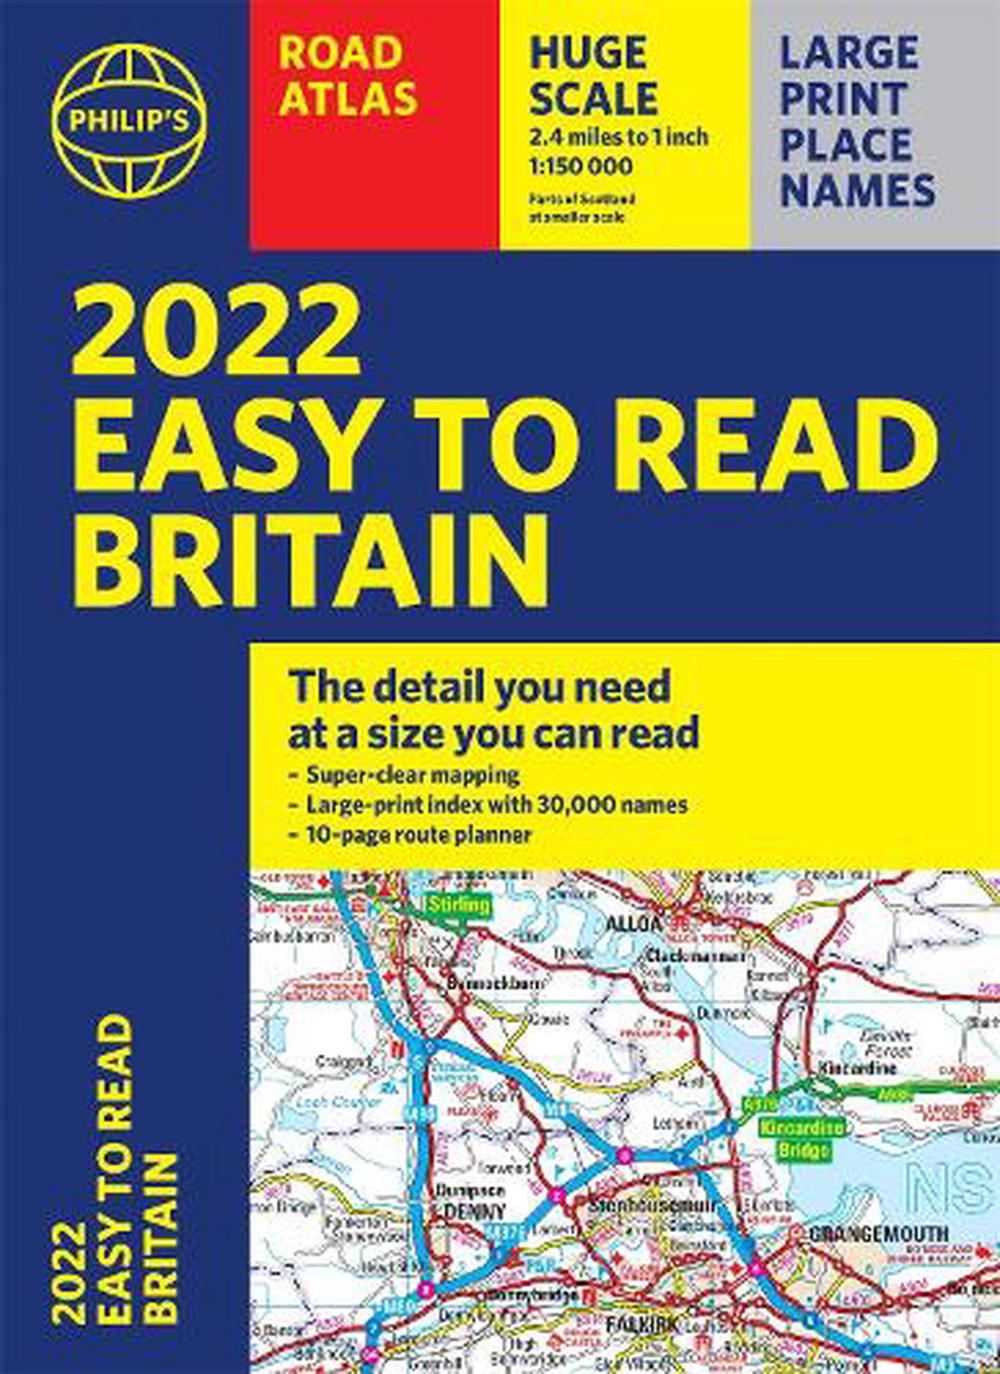 2022 Philip's Easy to Read Britain Road Atlas (A4 Paperback) by Philip